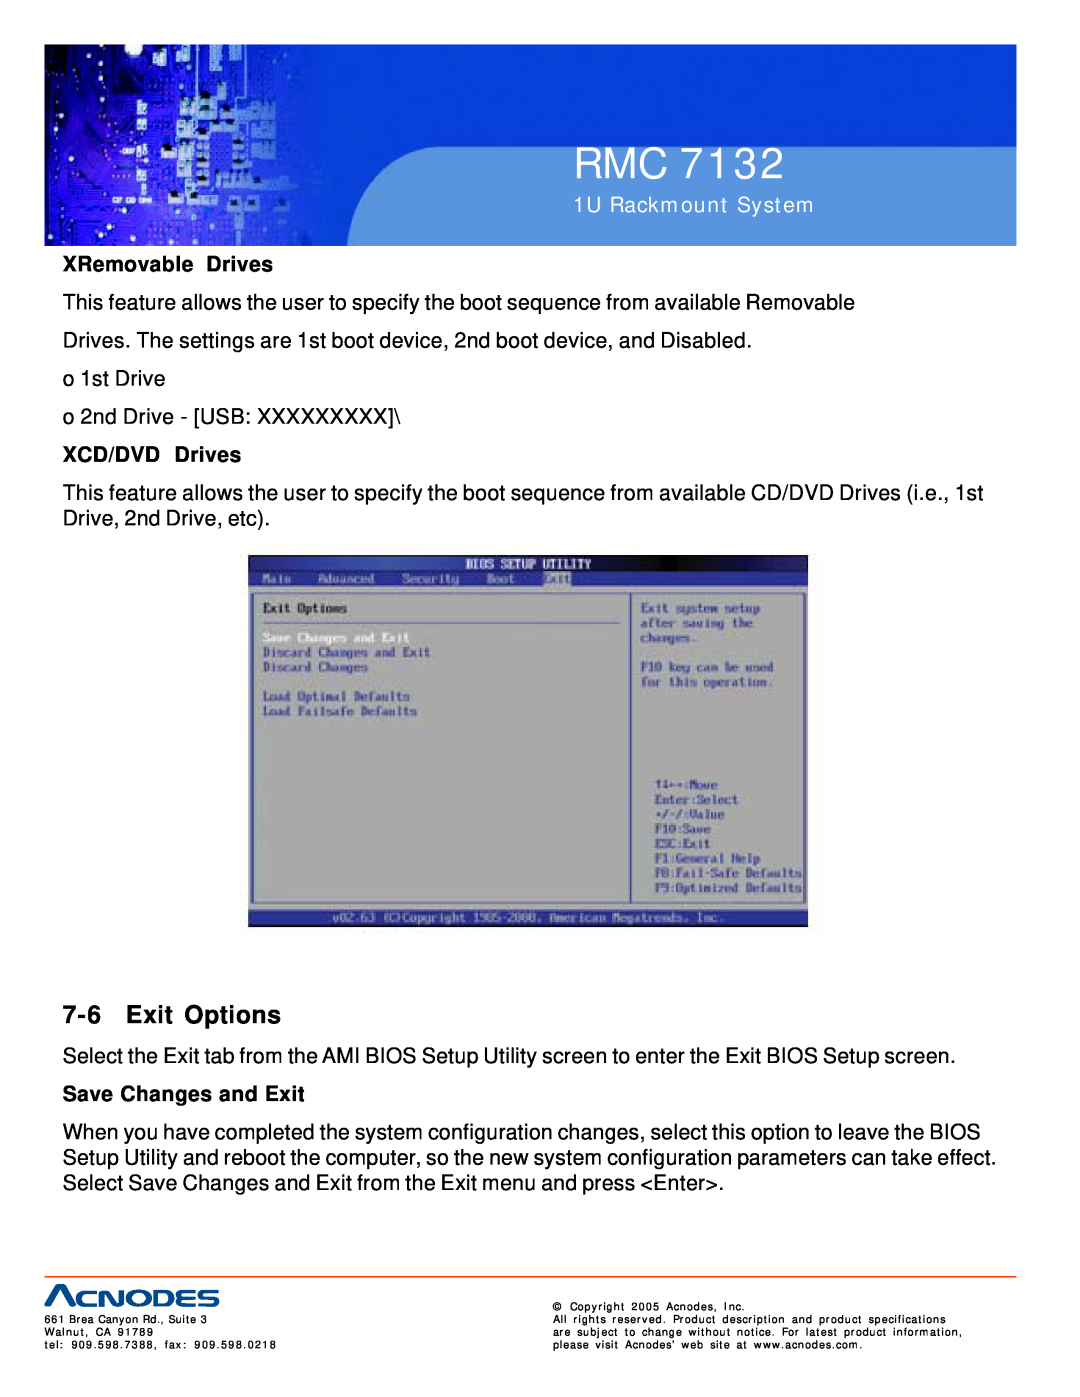 Acnodes RMC 7132 user manual Exit Options, XRemovable Drives, XCD/DVD Drives, Save Changes and Exit, 1U Rackmount System 